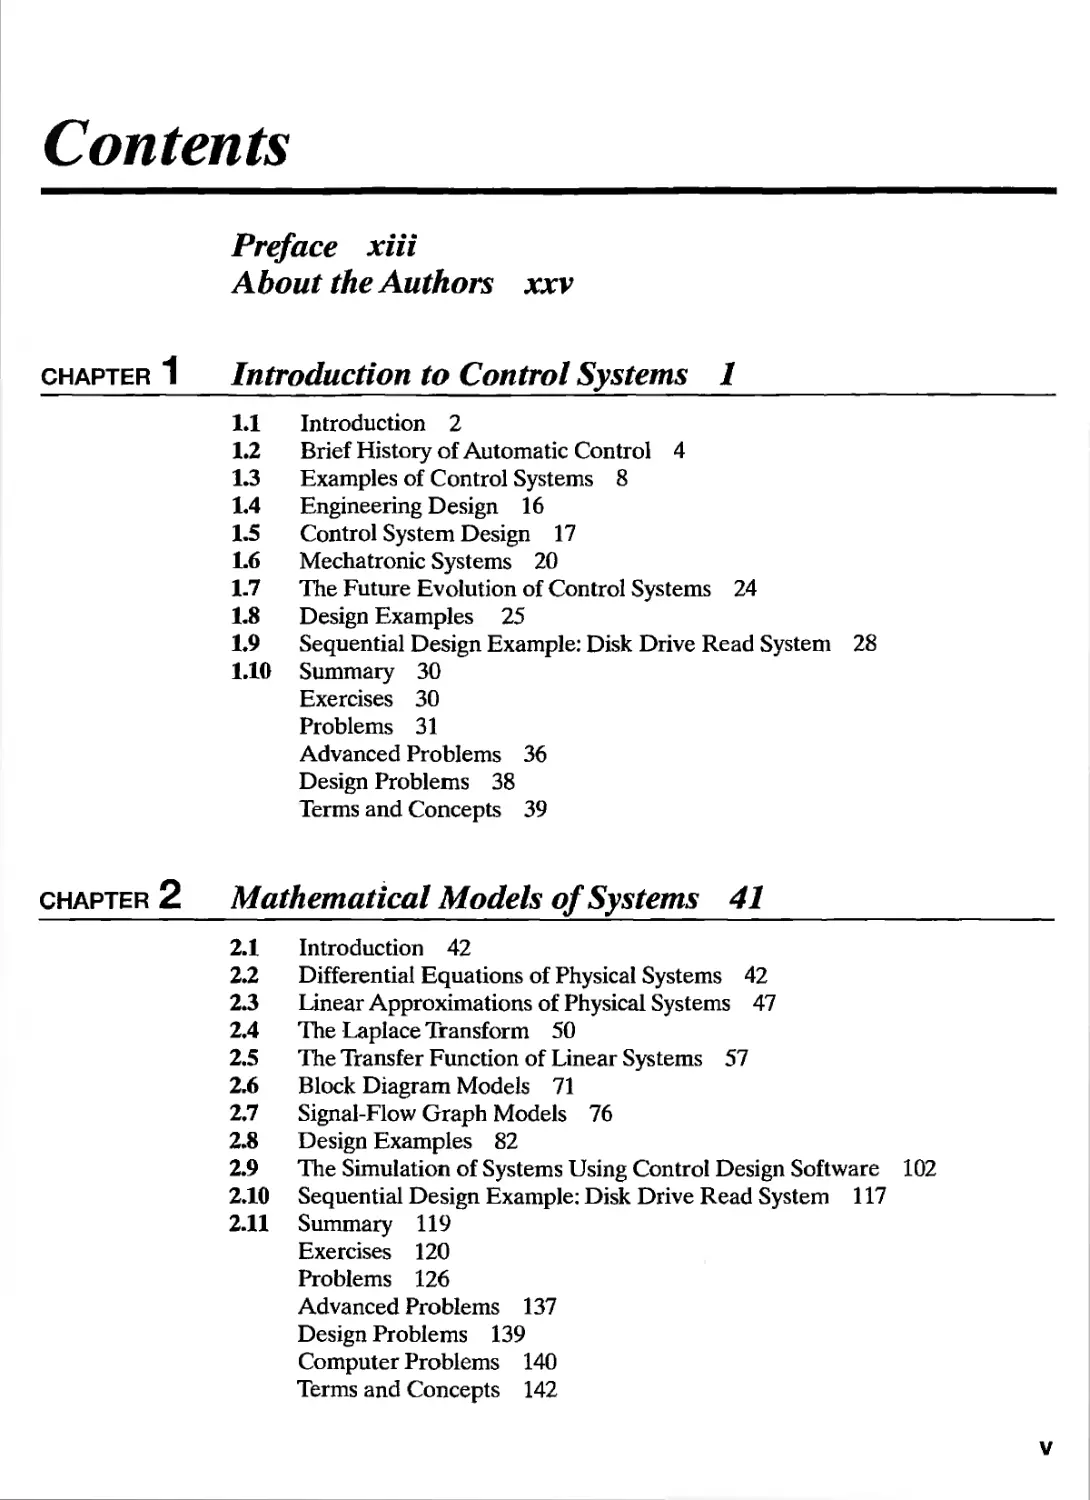 Preface, About the Authors
1 Introduction to Control Systems
2 Mathematical Models of Systems